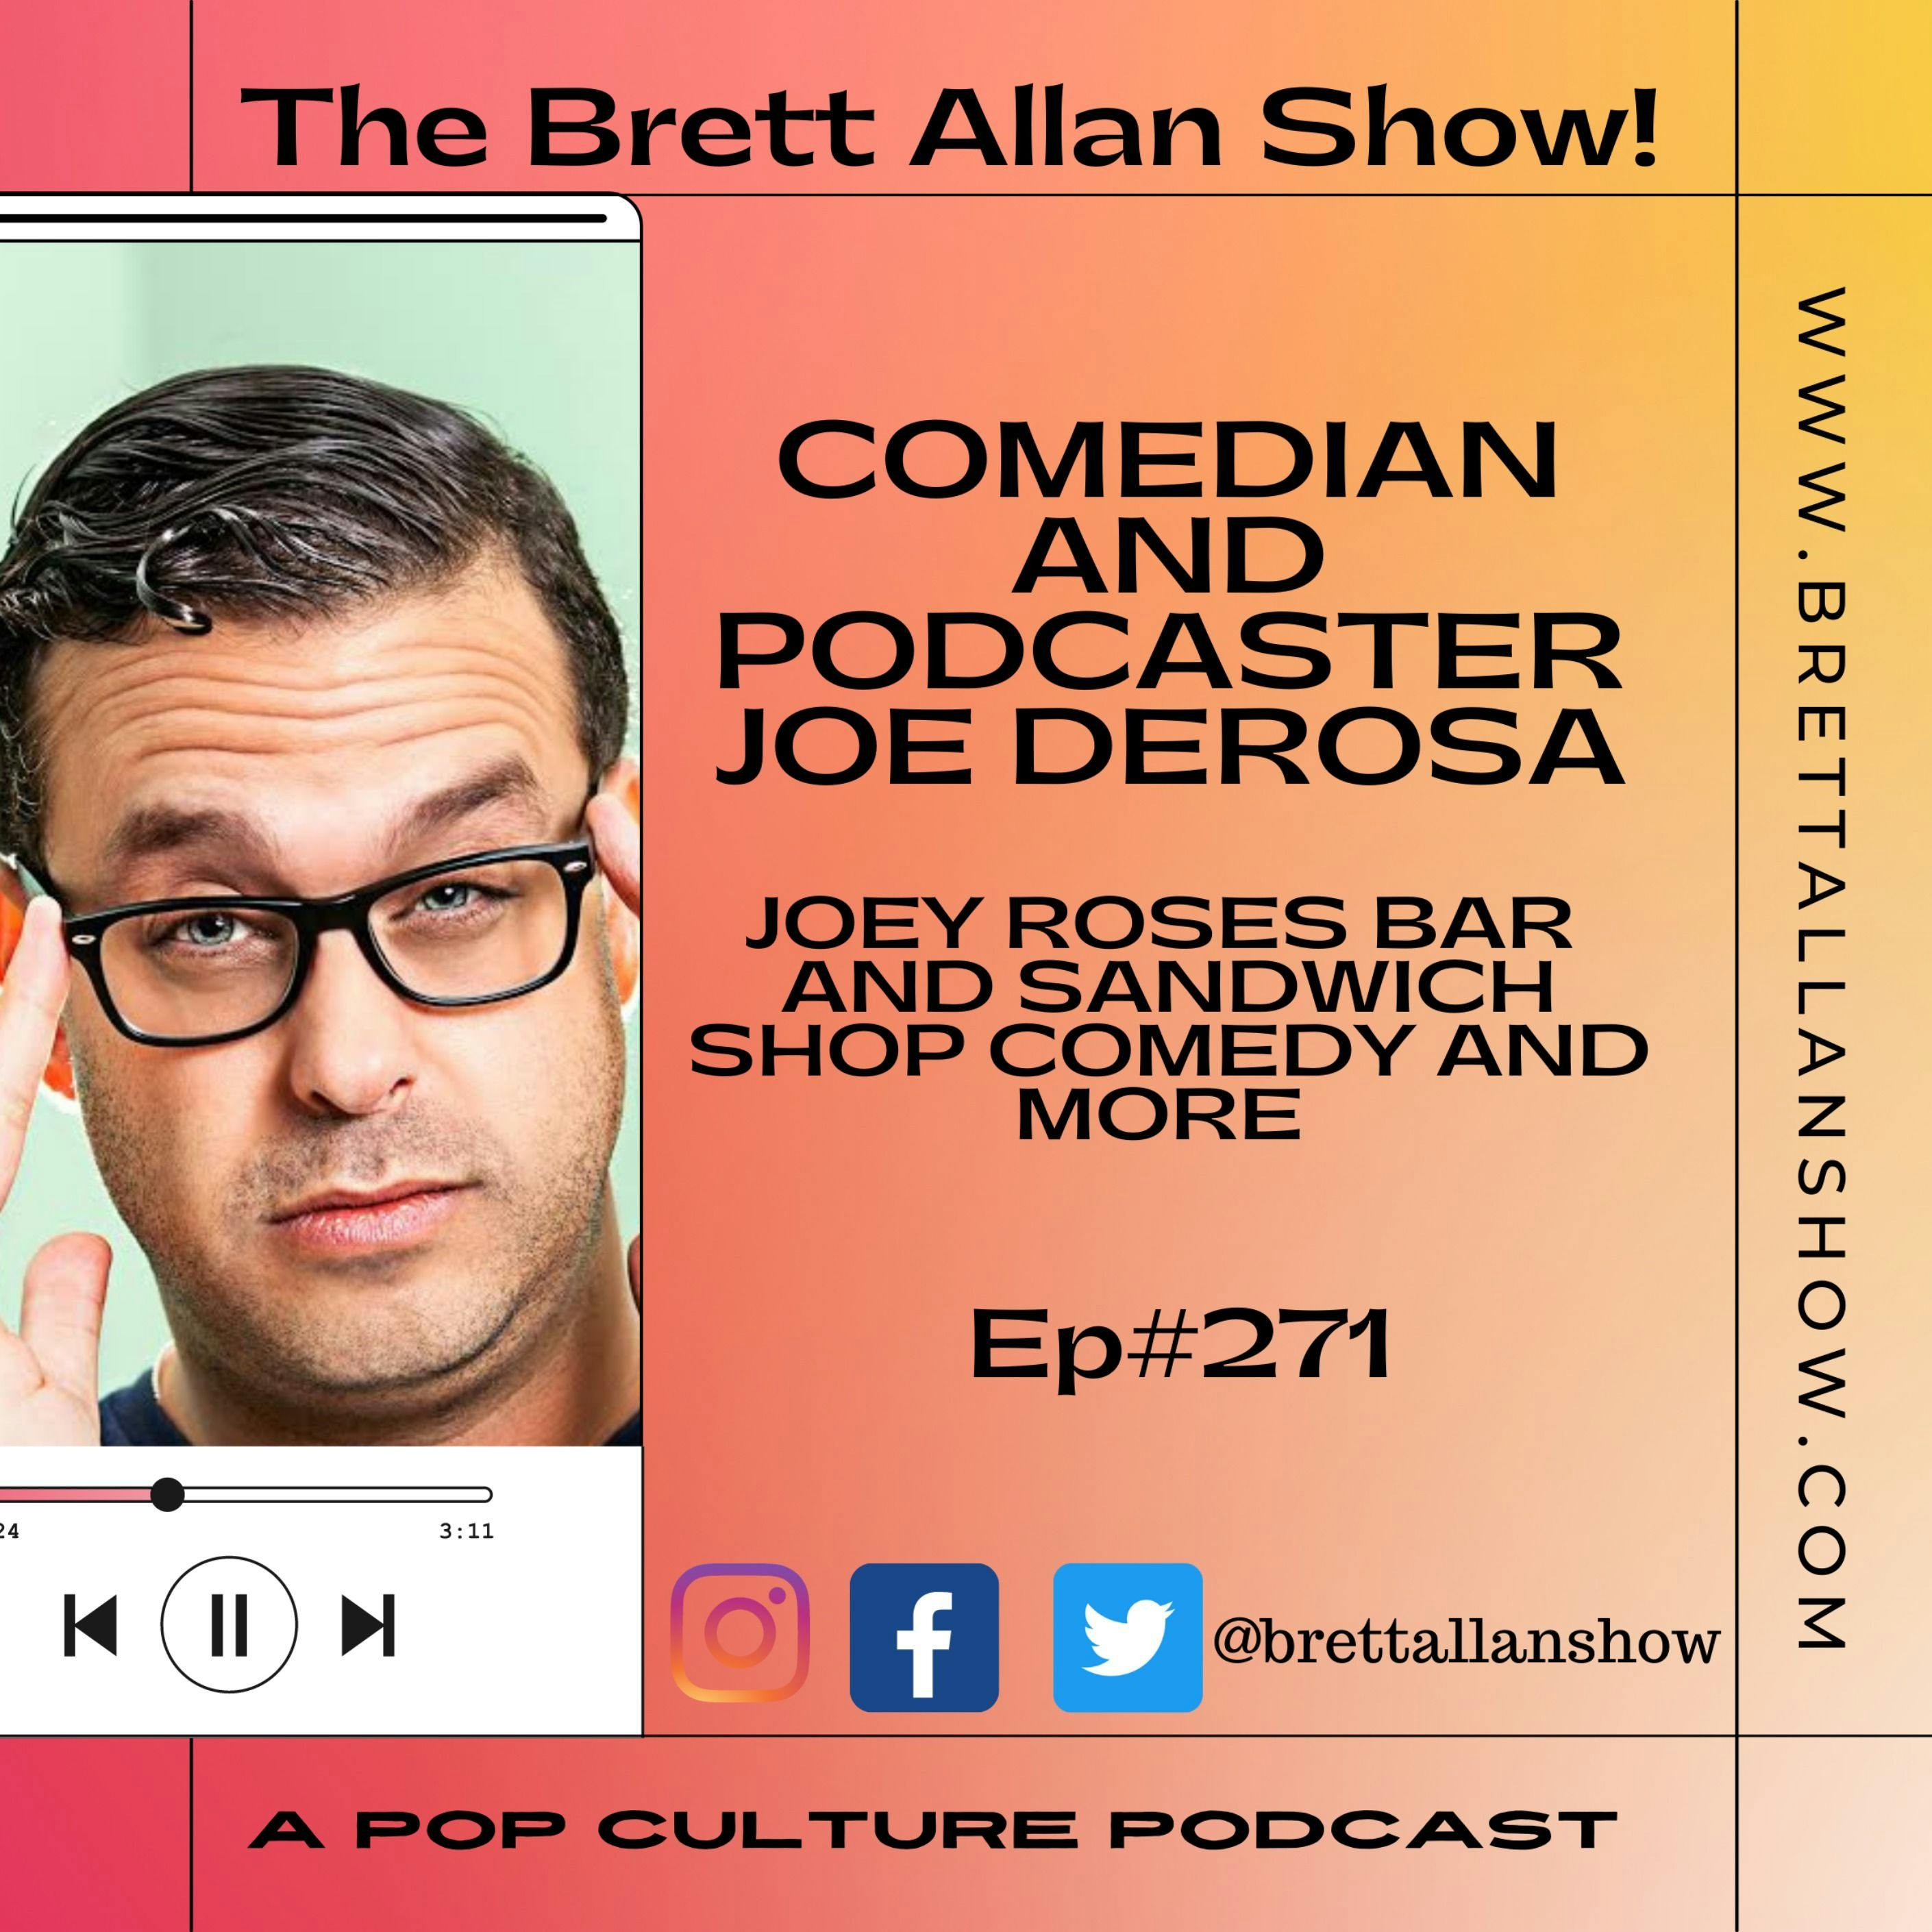 Comedian and Podcaster Joe DeRosa |  Joey Roses Bar and Sandwich Shop Comedy and More Image